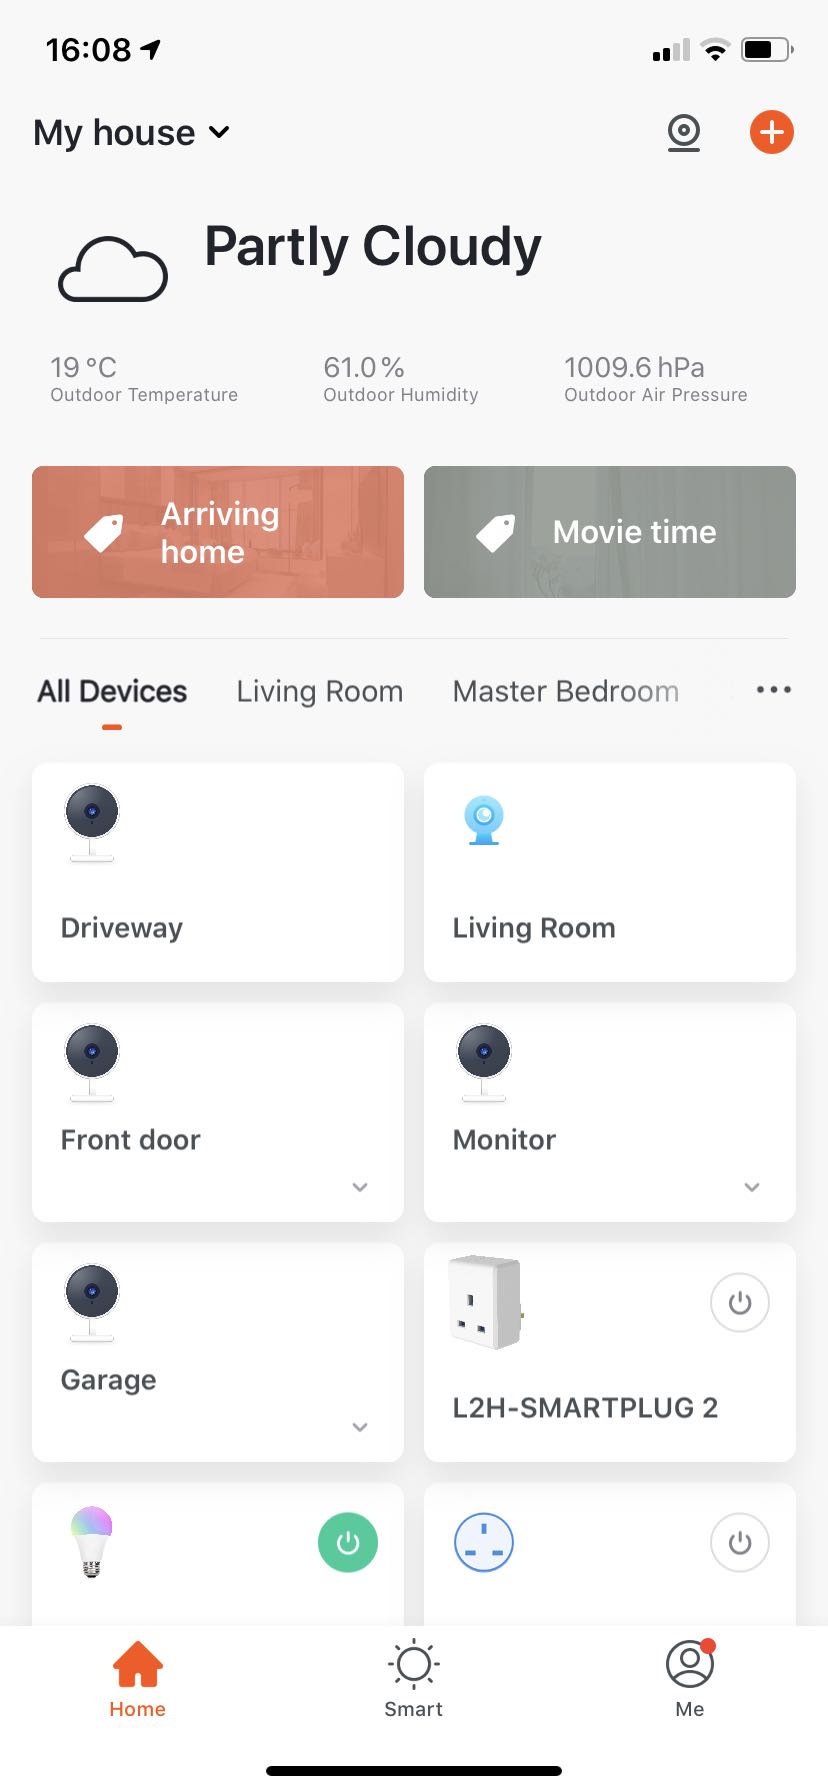 App, link2home, how to, user guide, smartphone, products, automation, secuirty, safety, ring, apple, nest, hive, tcp, exviz, kami,